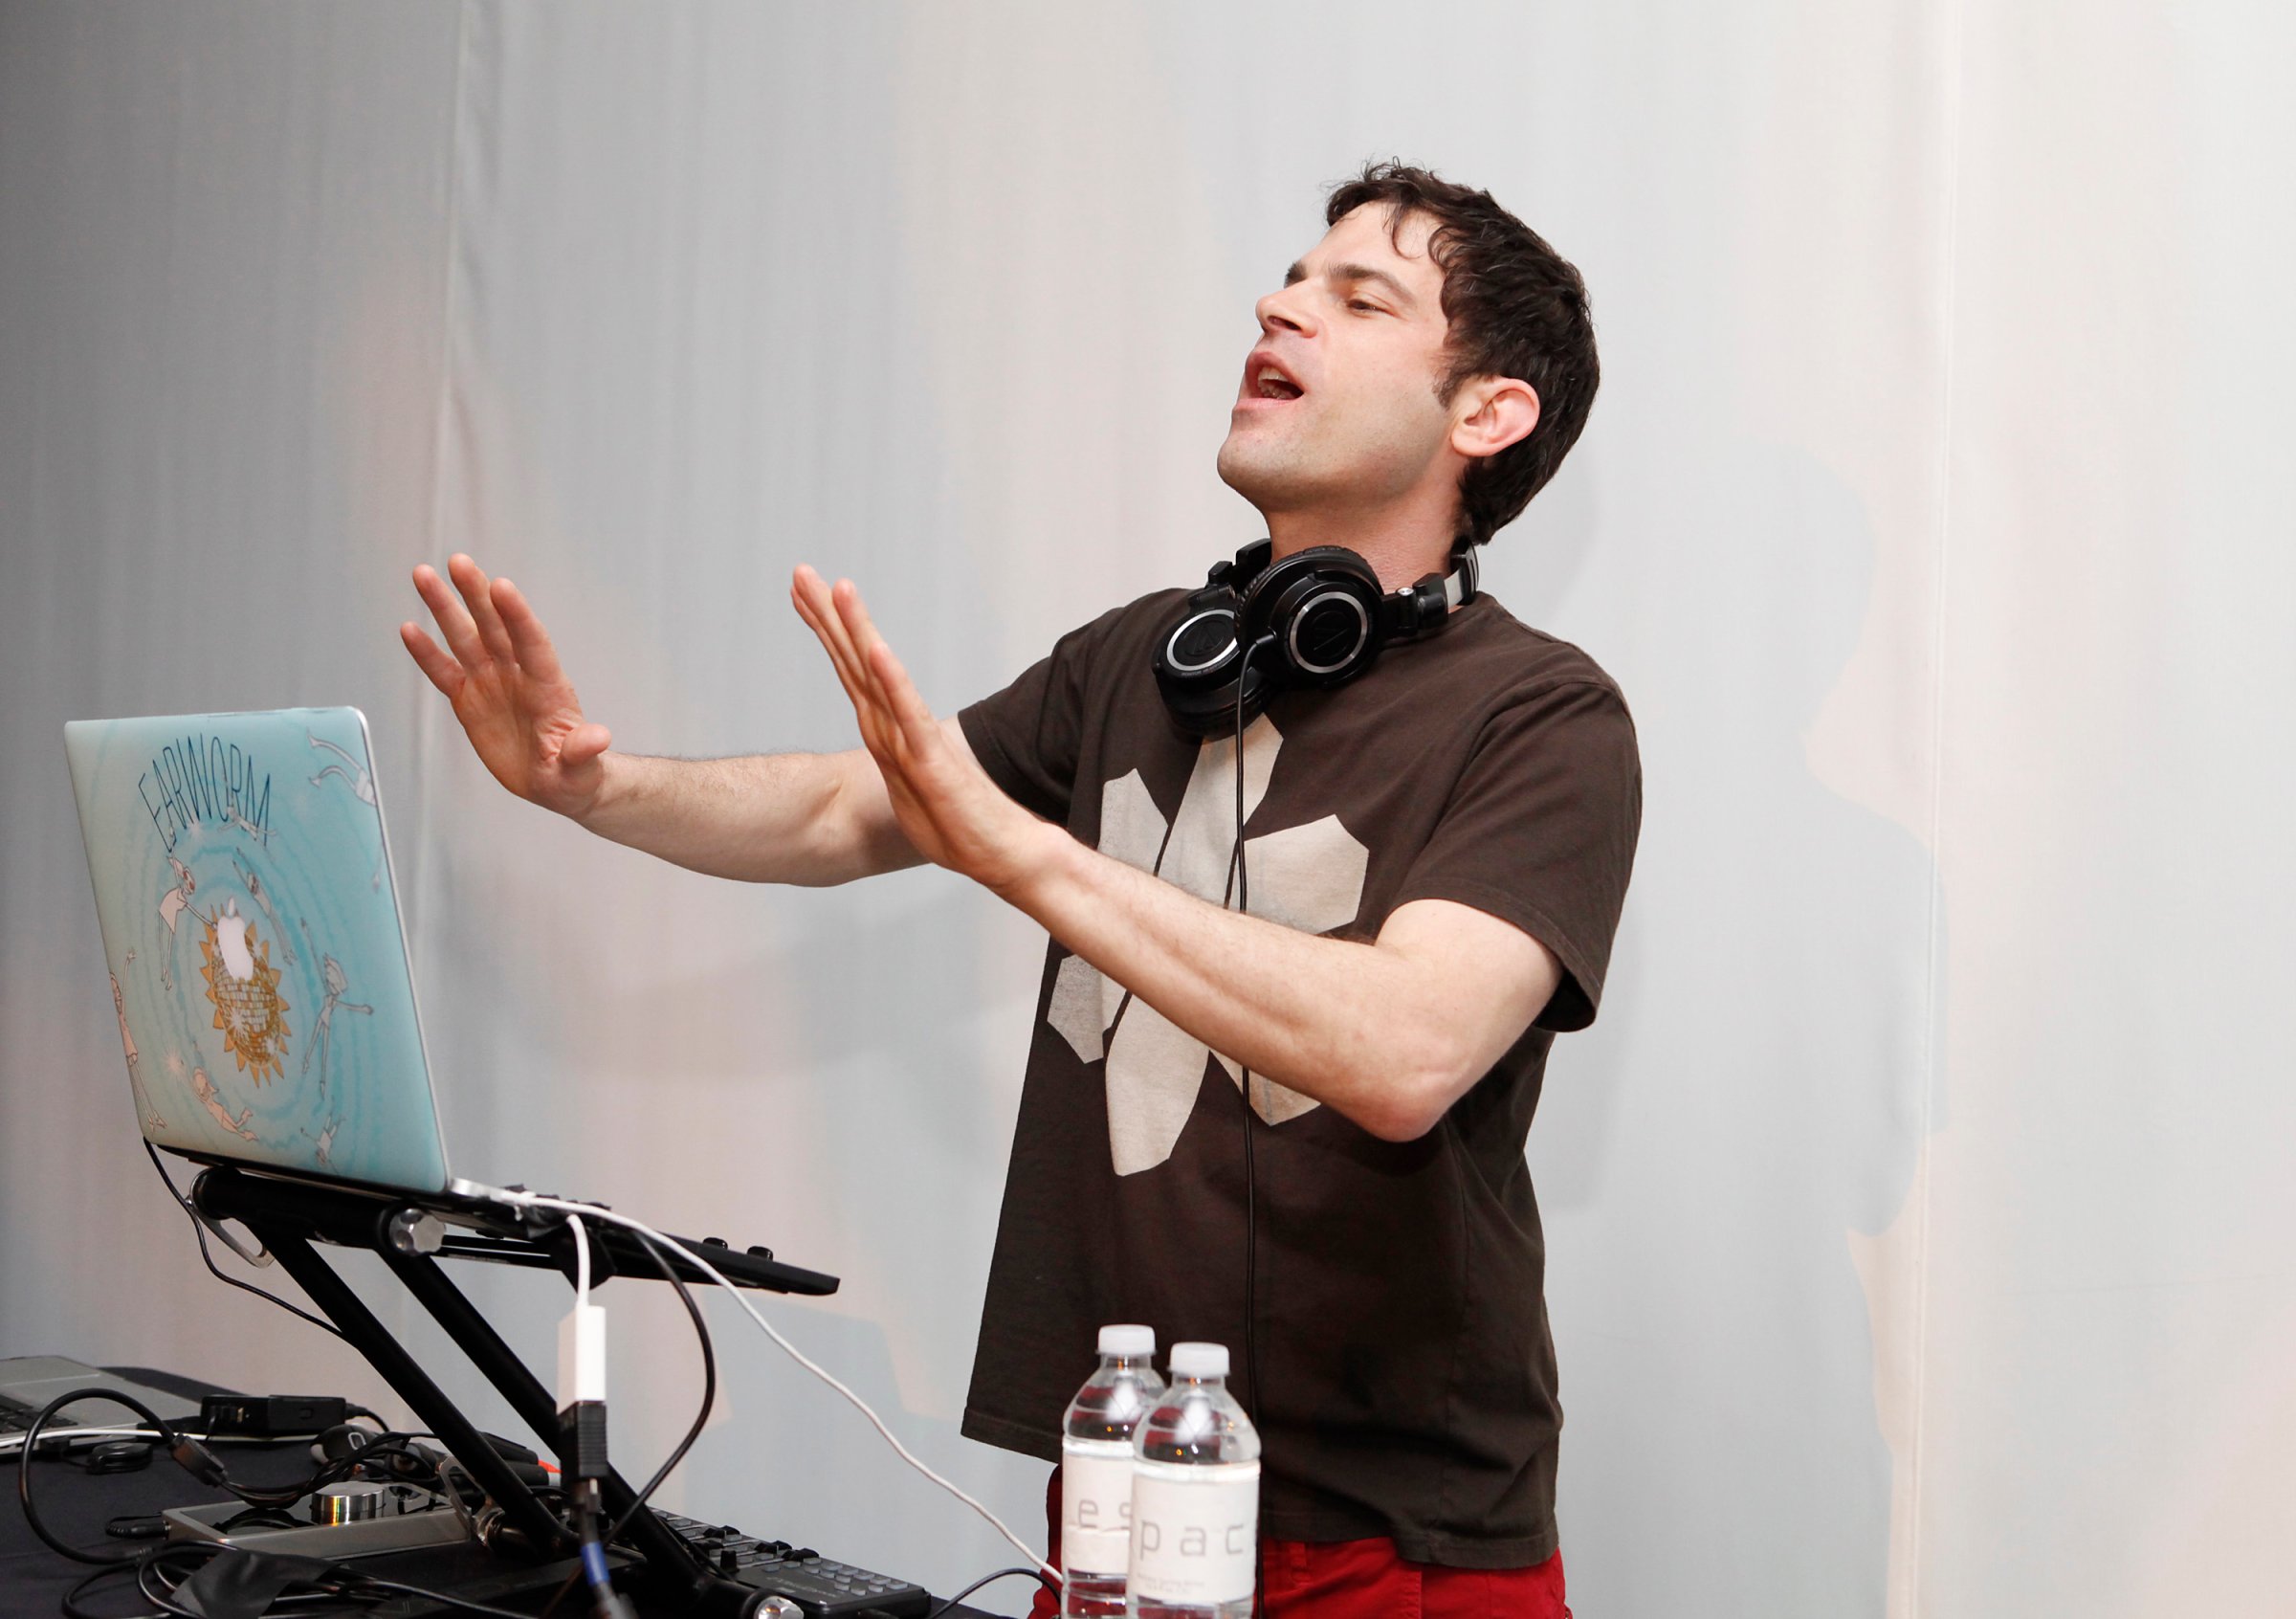 DJ Earworm performs at Operation Smile 2013 New York Junior Smile Event in New York on April, 26, 2013.